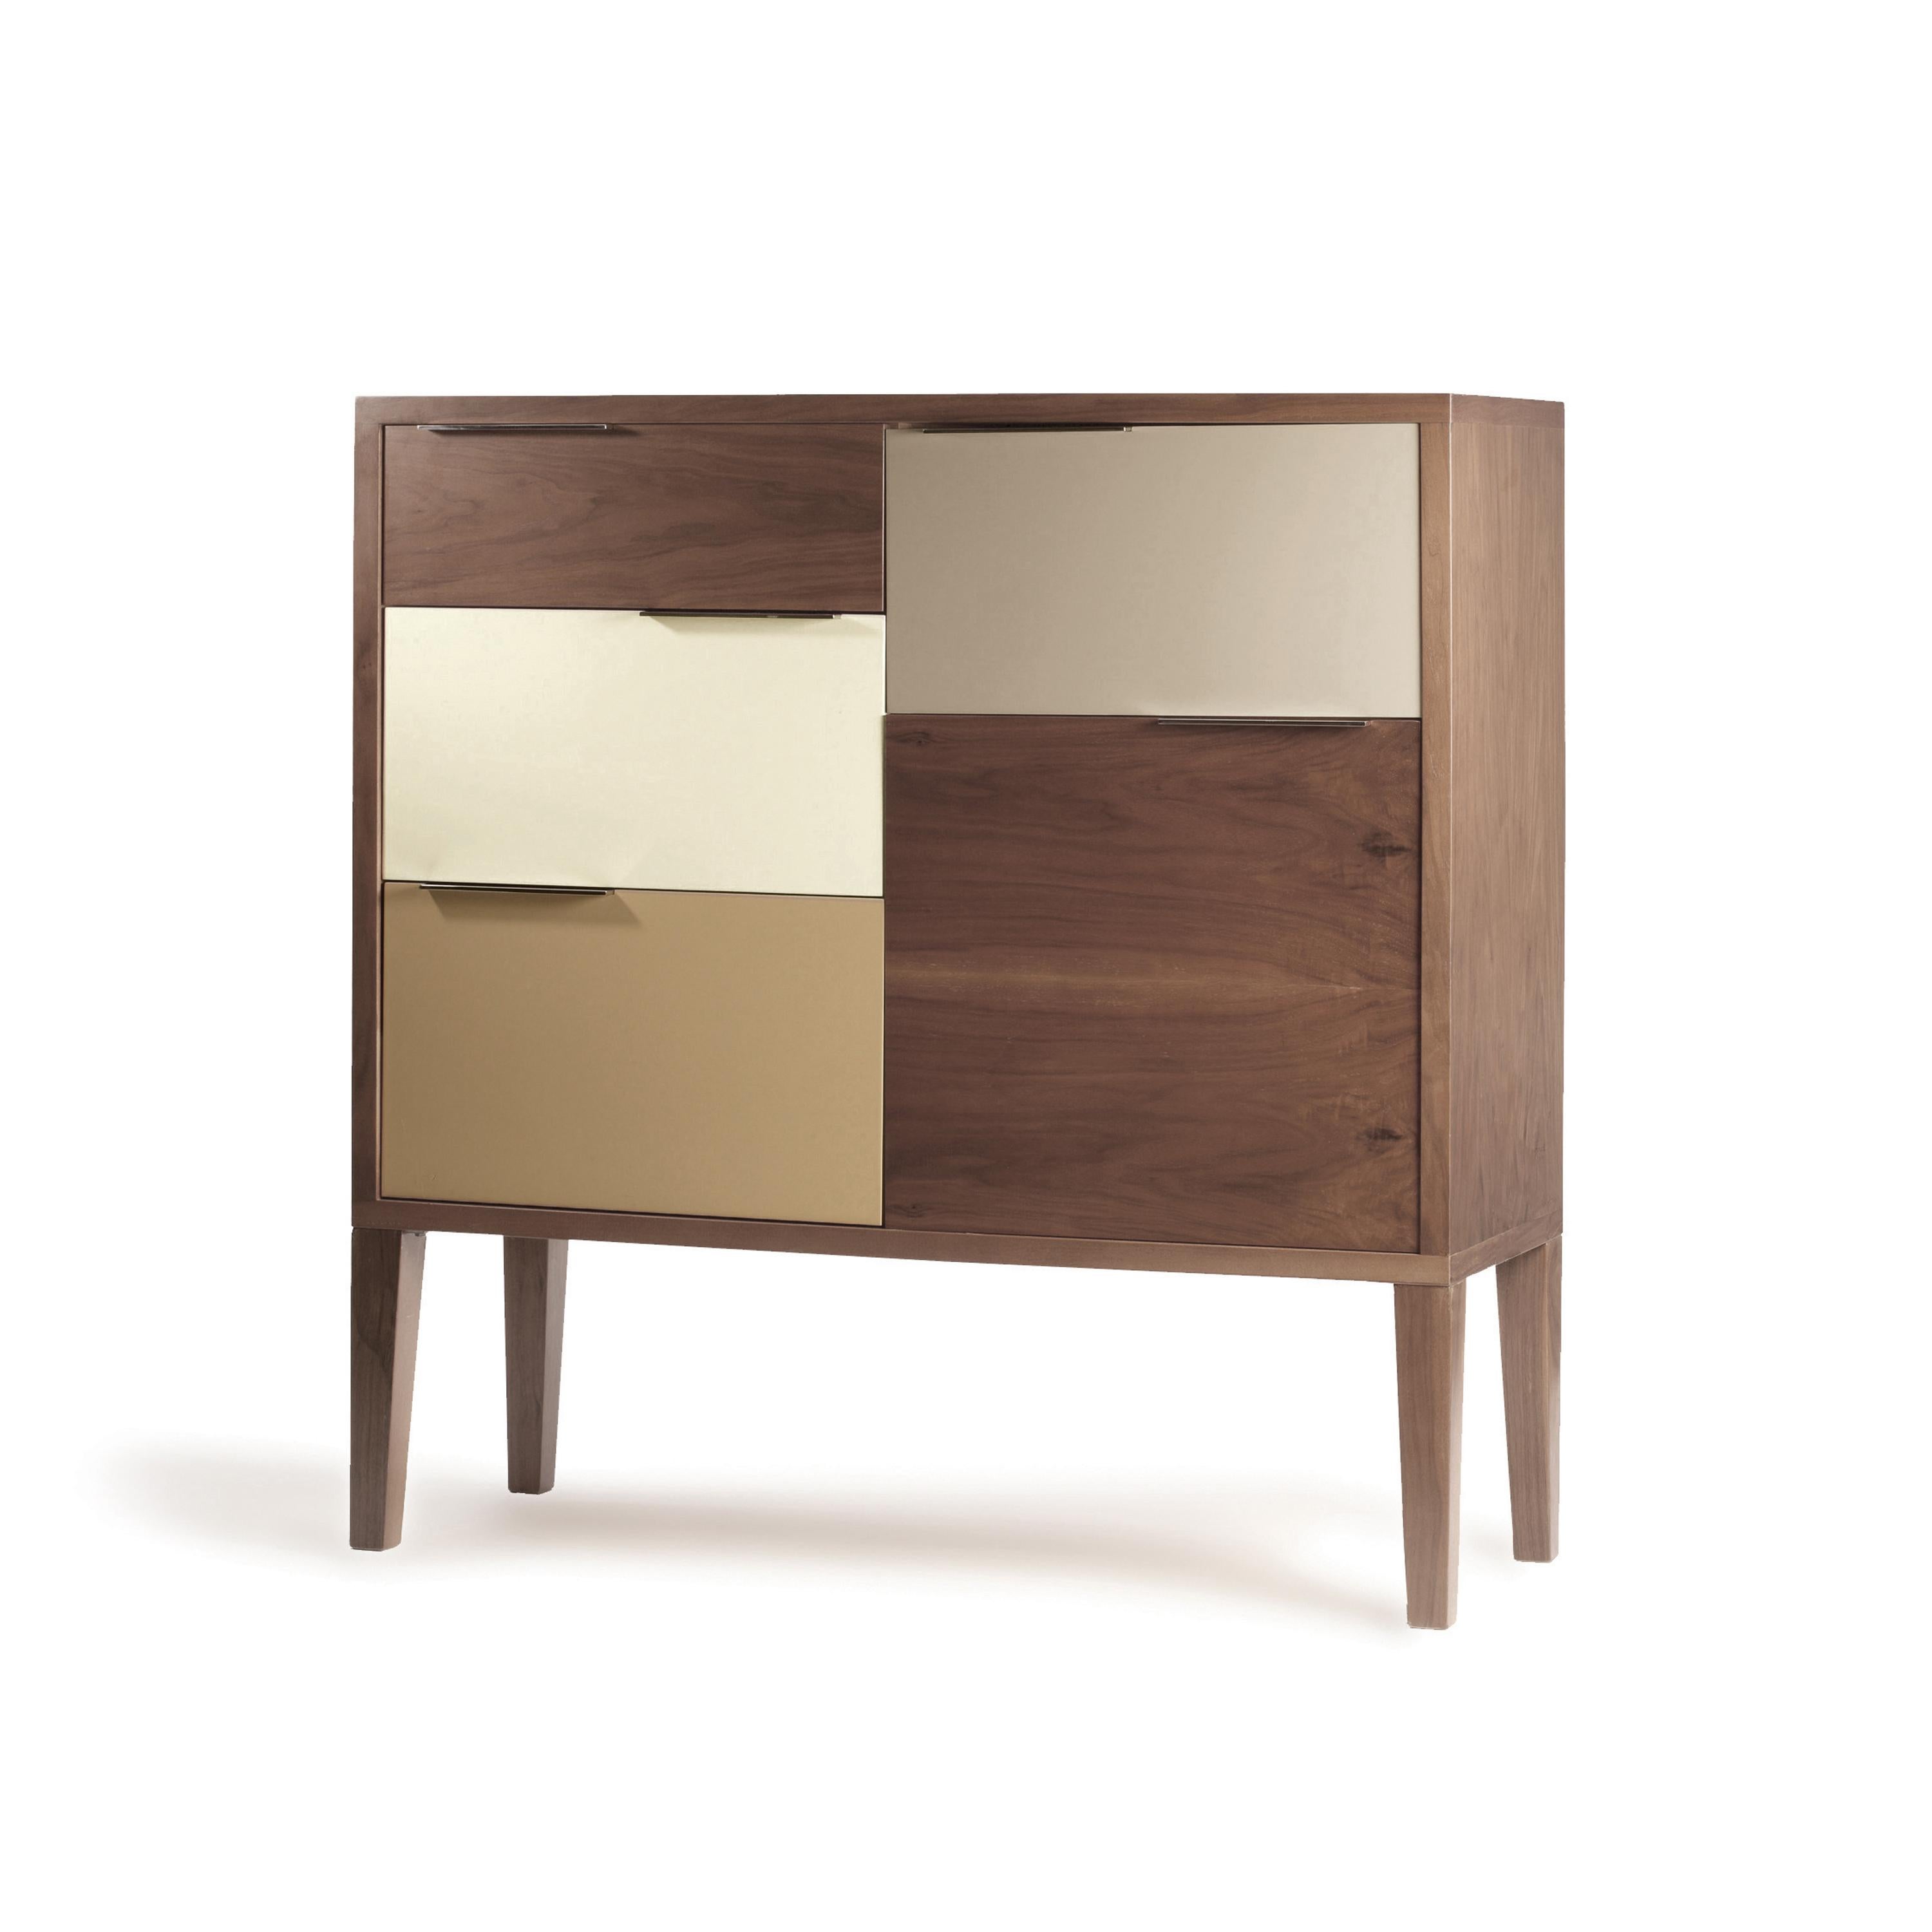 Muse bar cabinet is a high quality product by Mambo Unlimited Ideas, crafted in polished or matte wood veneer structure and feet, lacquered doors and drawers and stainless steel handles. It features four doors and one drawer. It clearly transpires